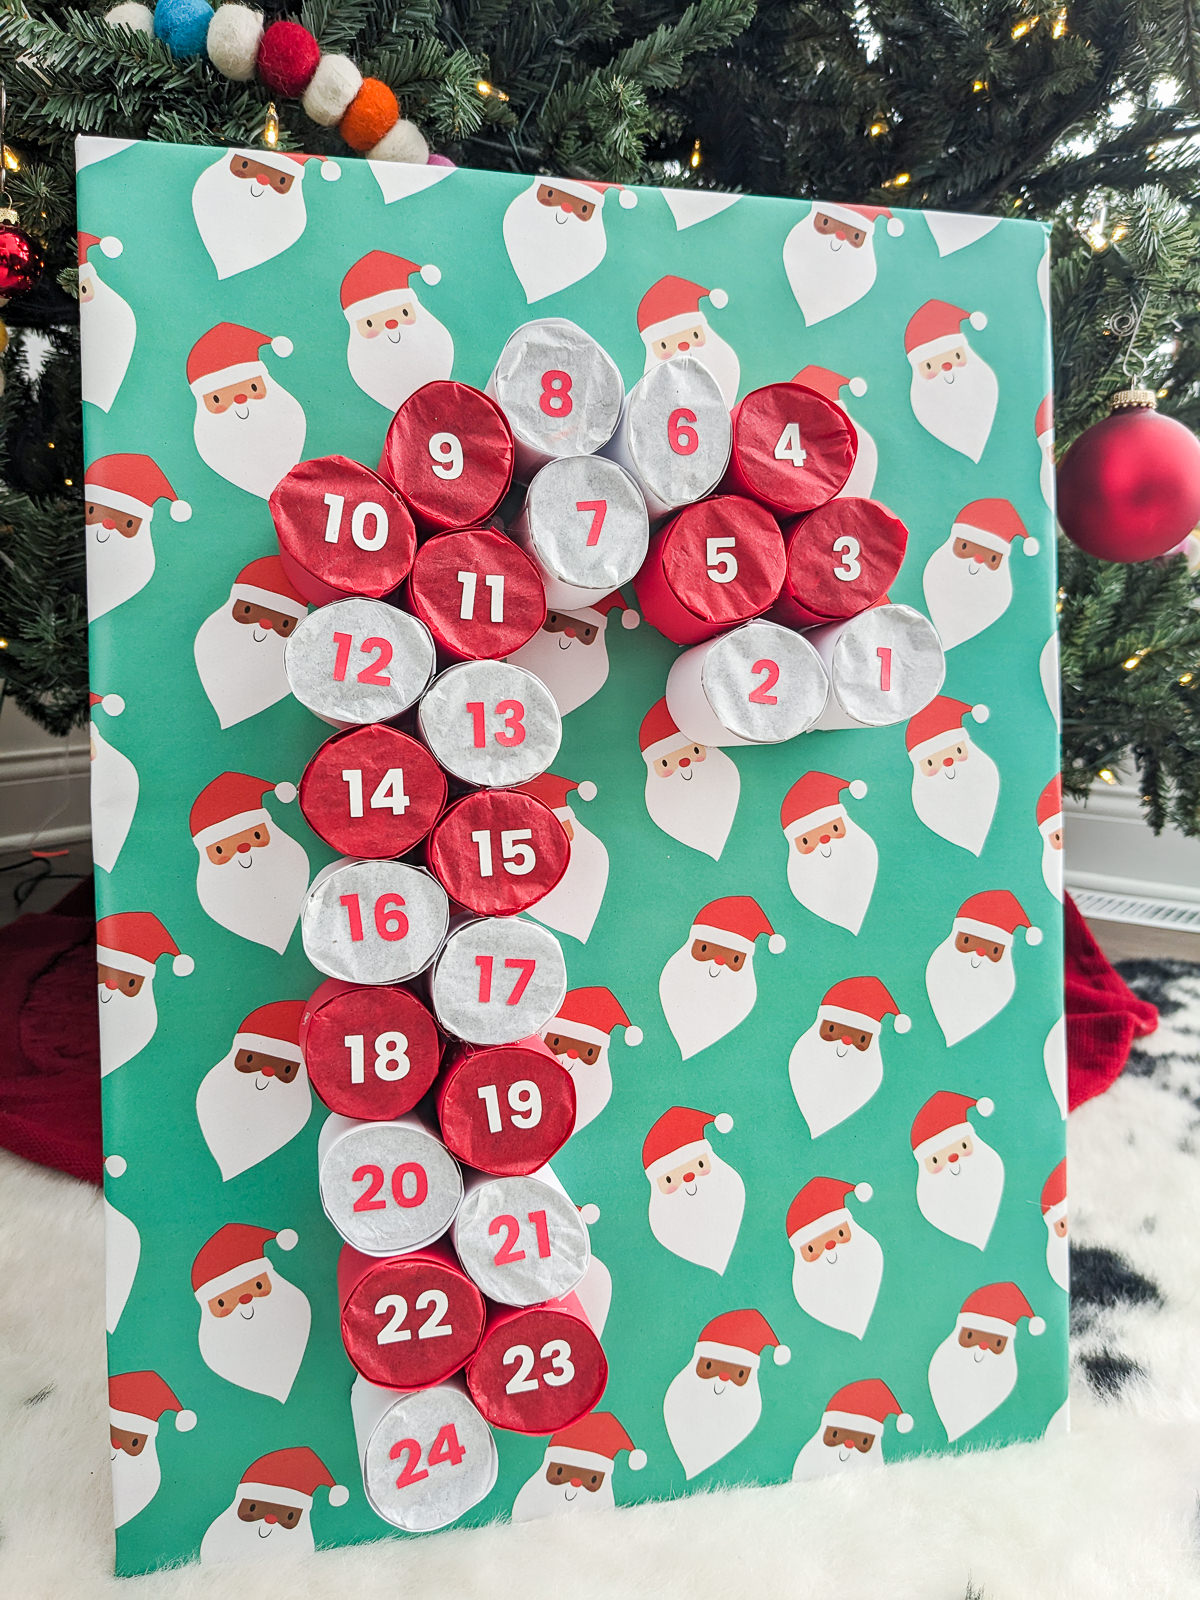 Candy Cane DIY advent calendar made using toilet paper rolls